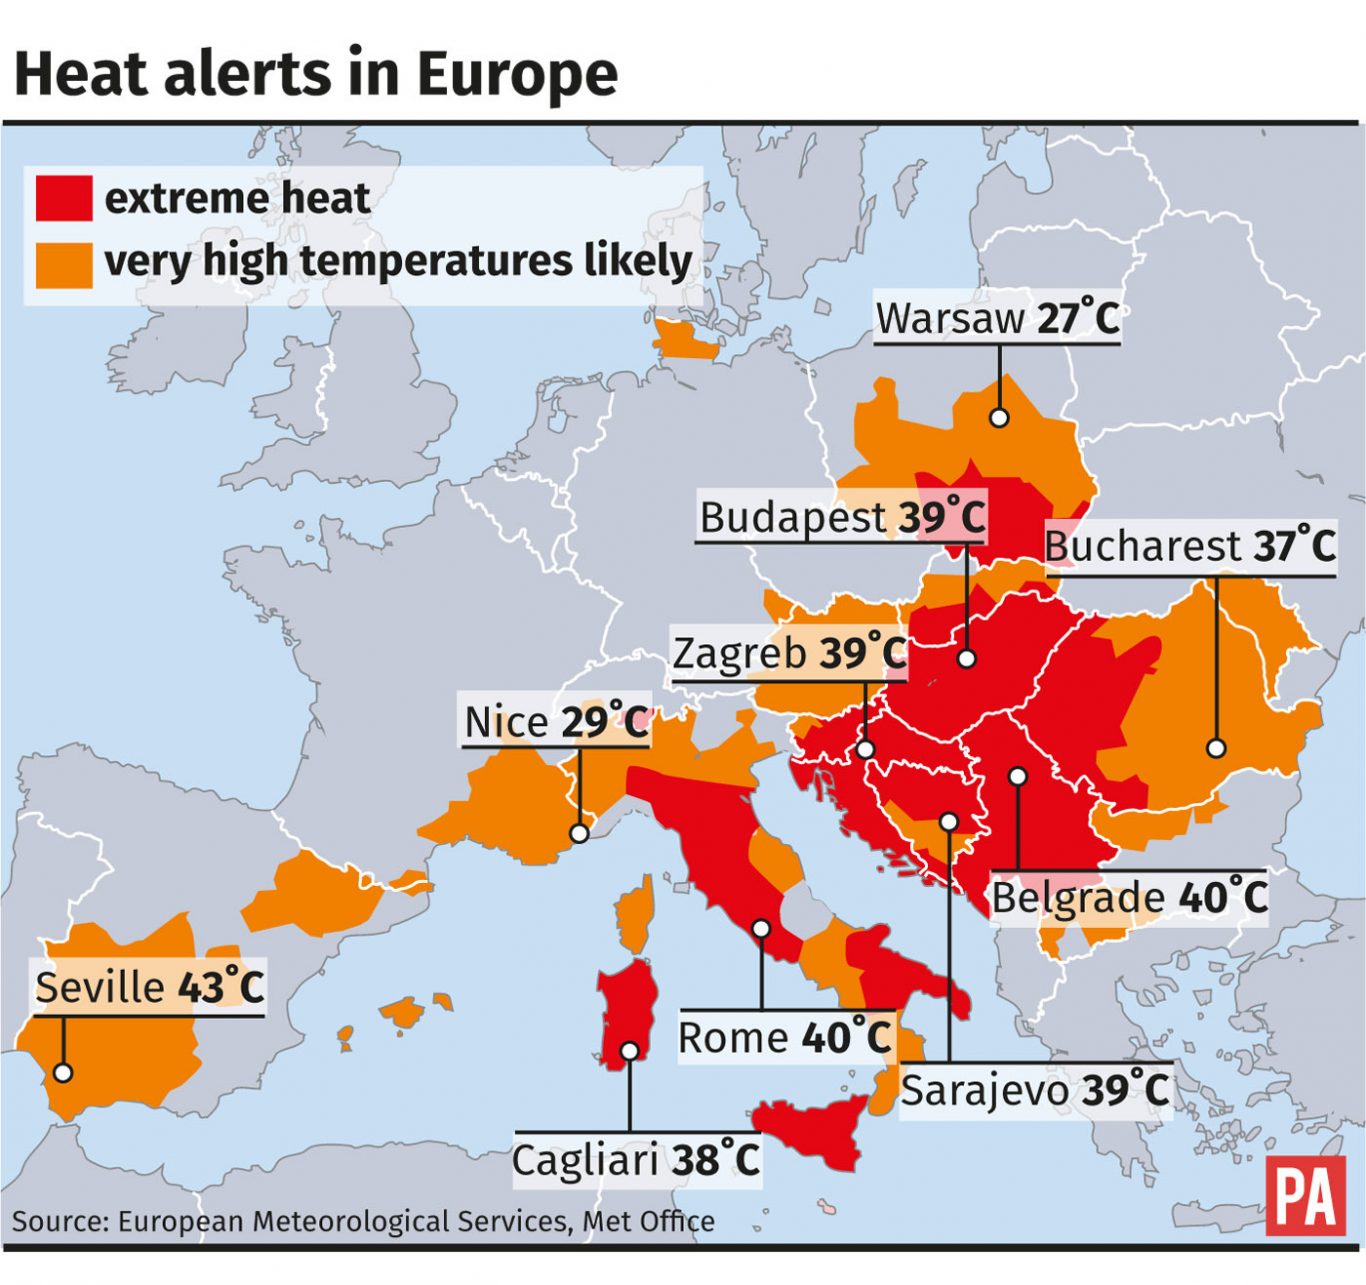 Heatwaves and weather events ‘could kill over 100,000 a year in Europe